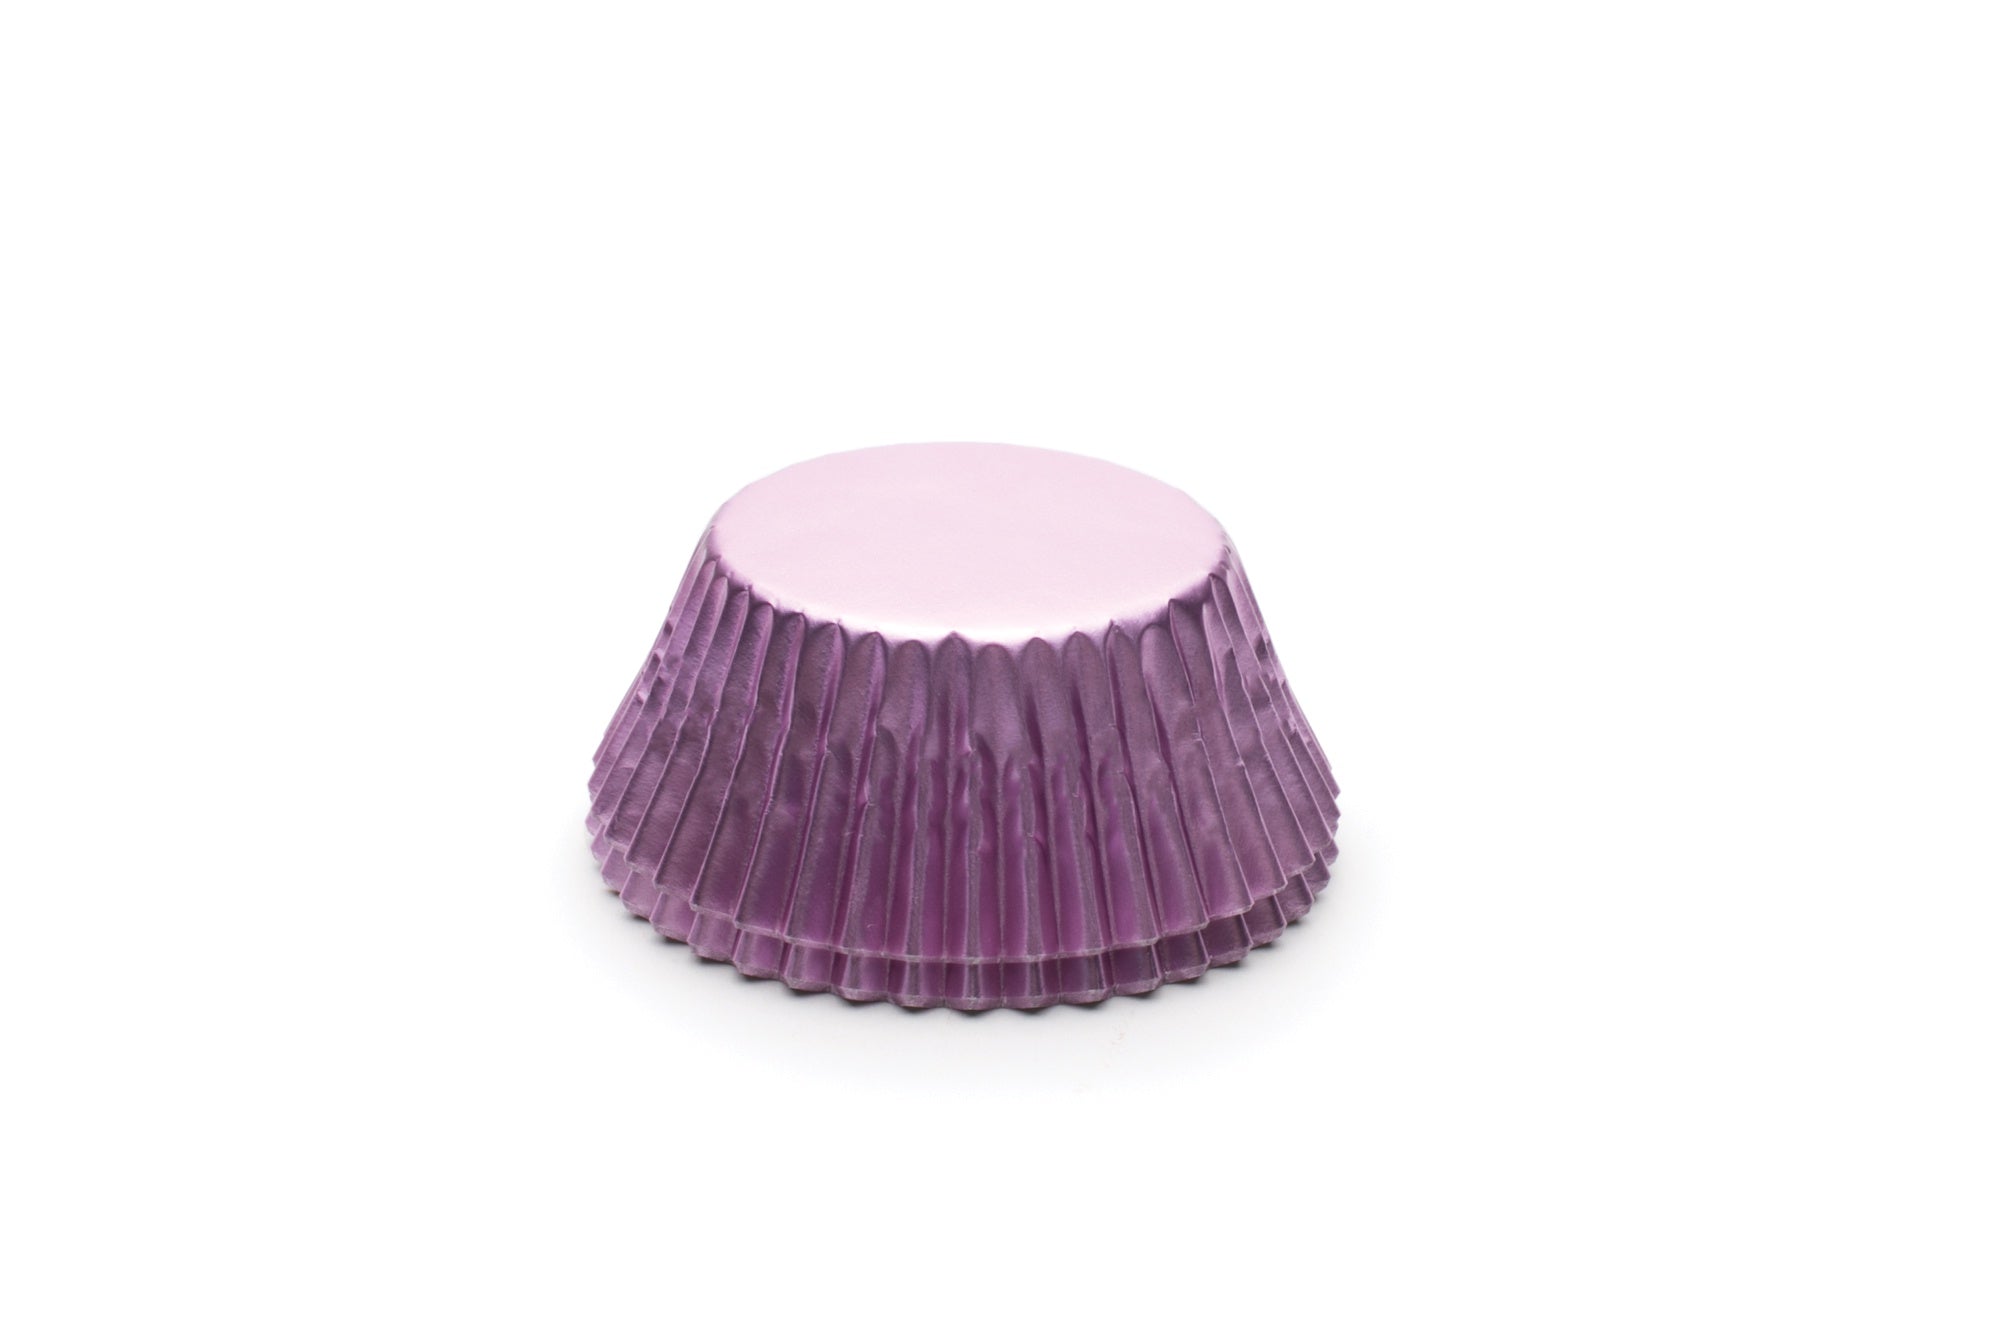 Light Pink/Purple Foil Baking Cups - 32 Cupcake Liners